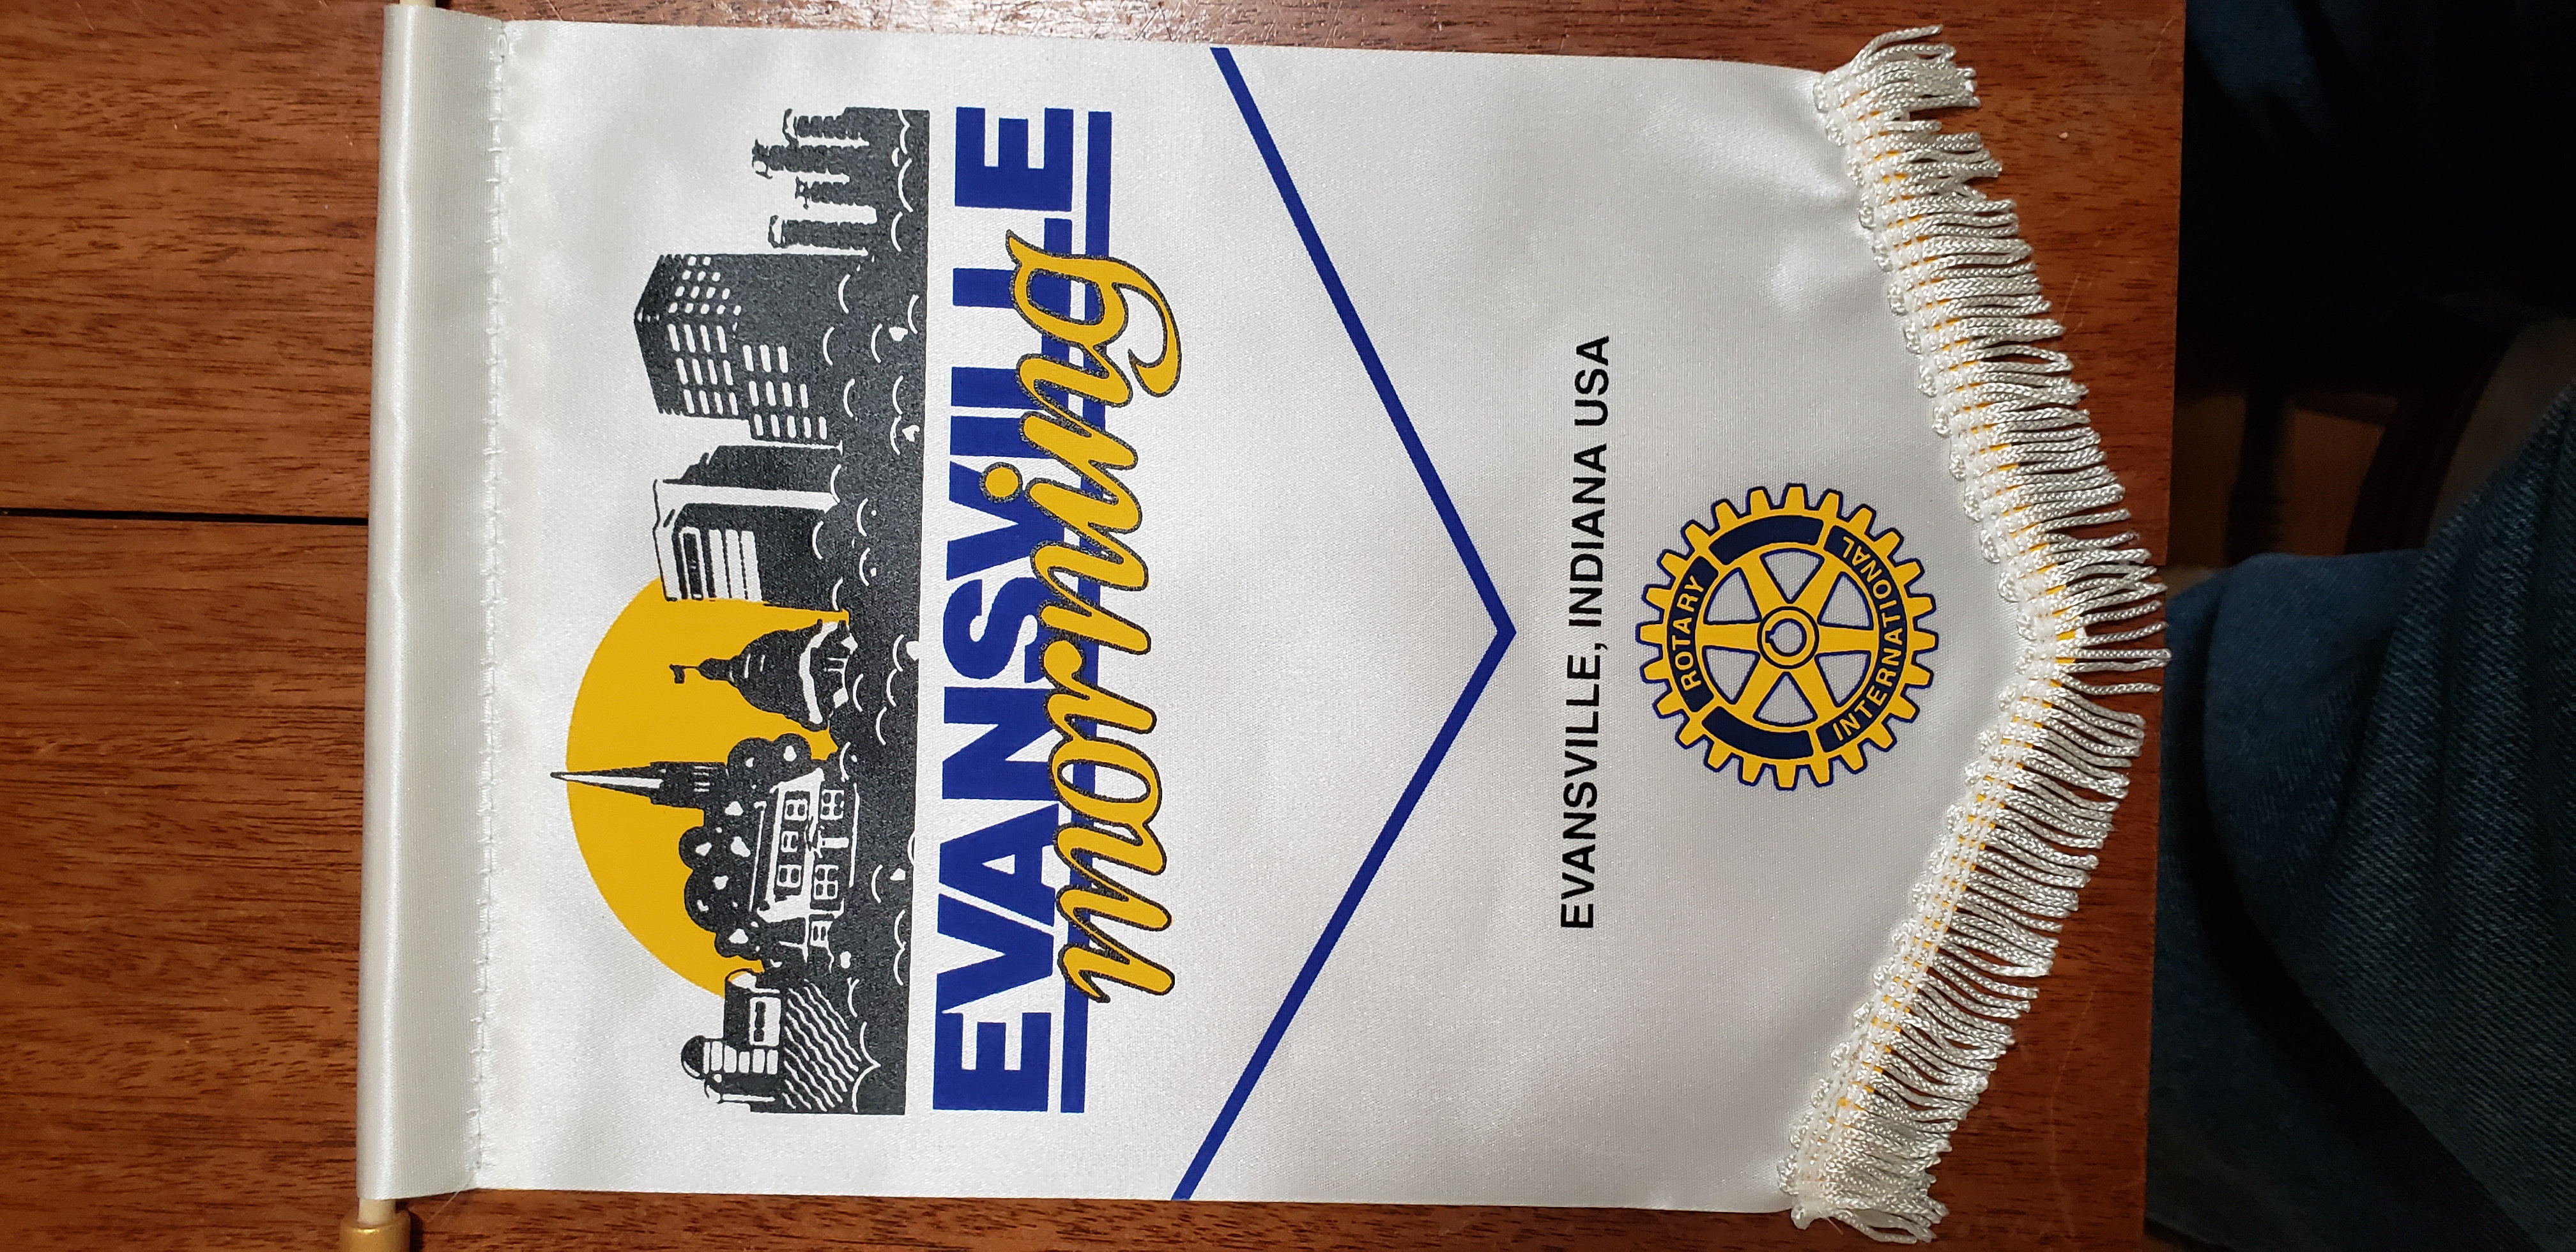 Evansville Morning Rotary Club